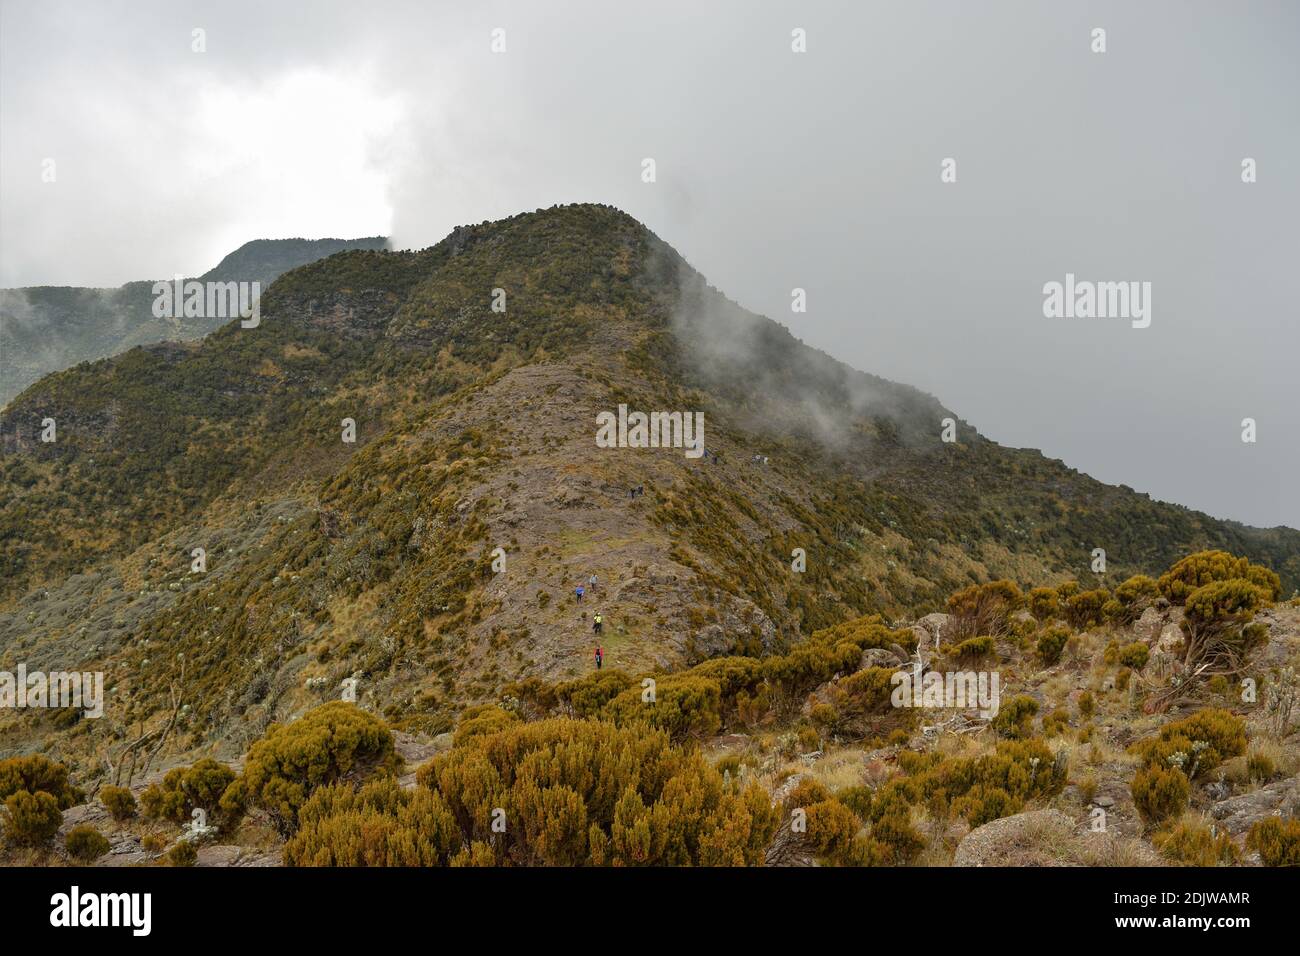 Scenic Mountain Landscapes Against A Foggy Background, Elephant Hill In The Aberdare Ranges, Kenya Stock Photo